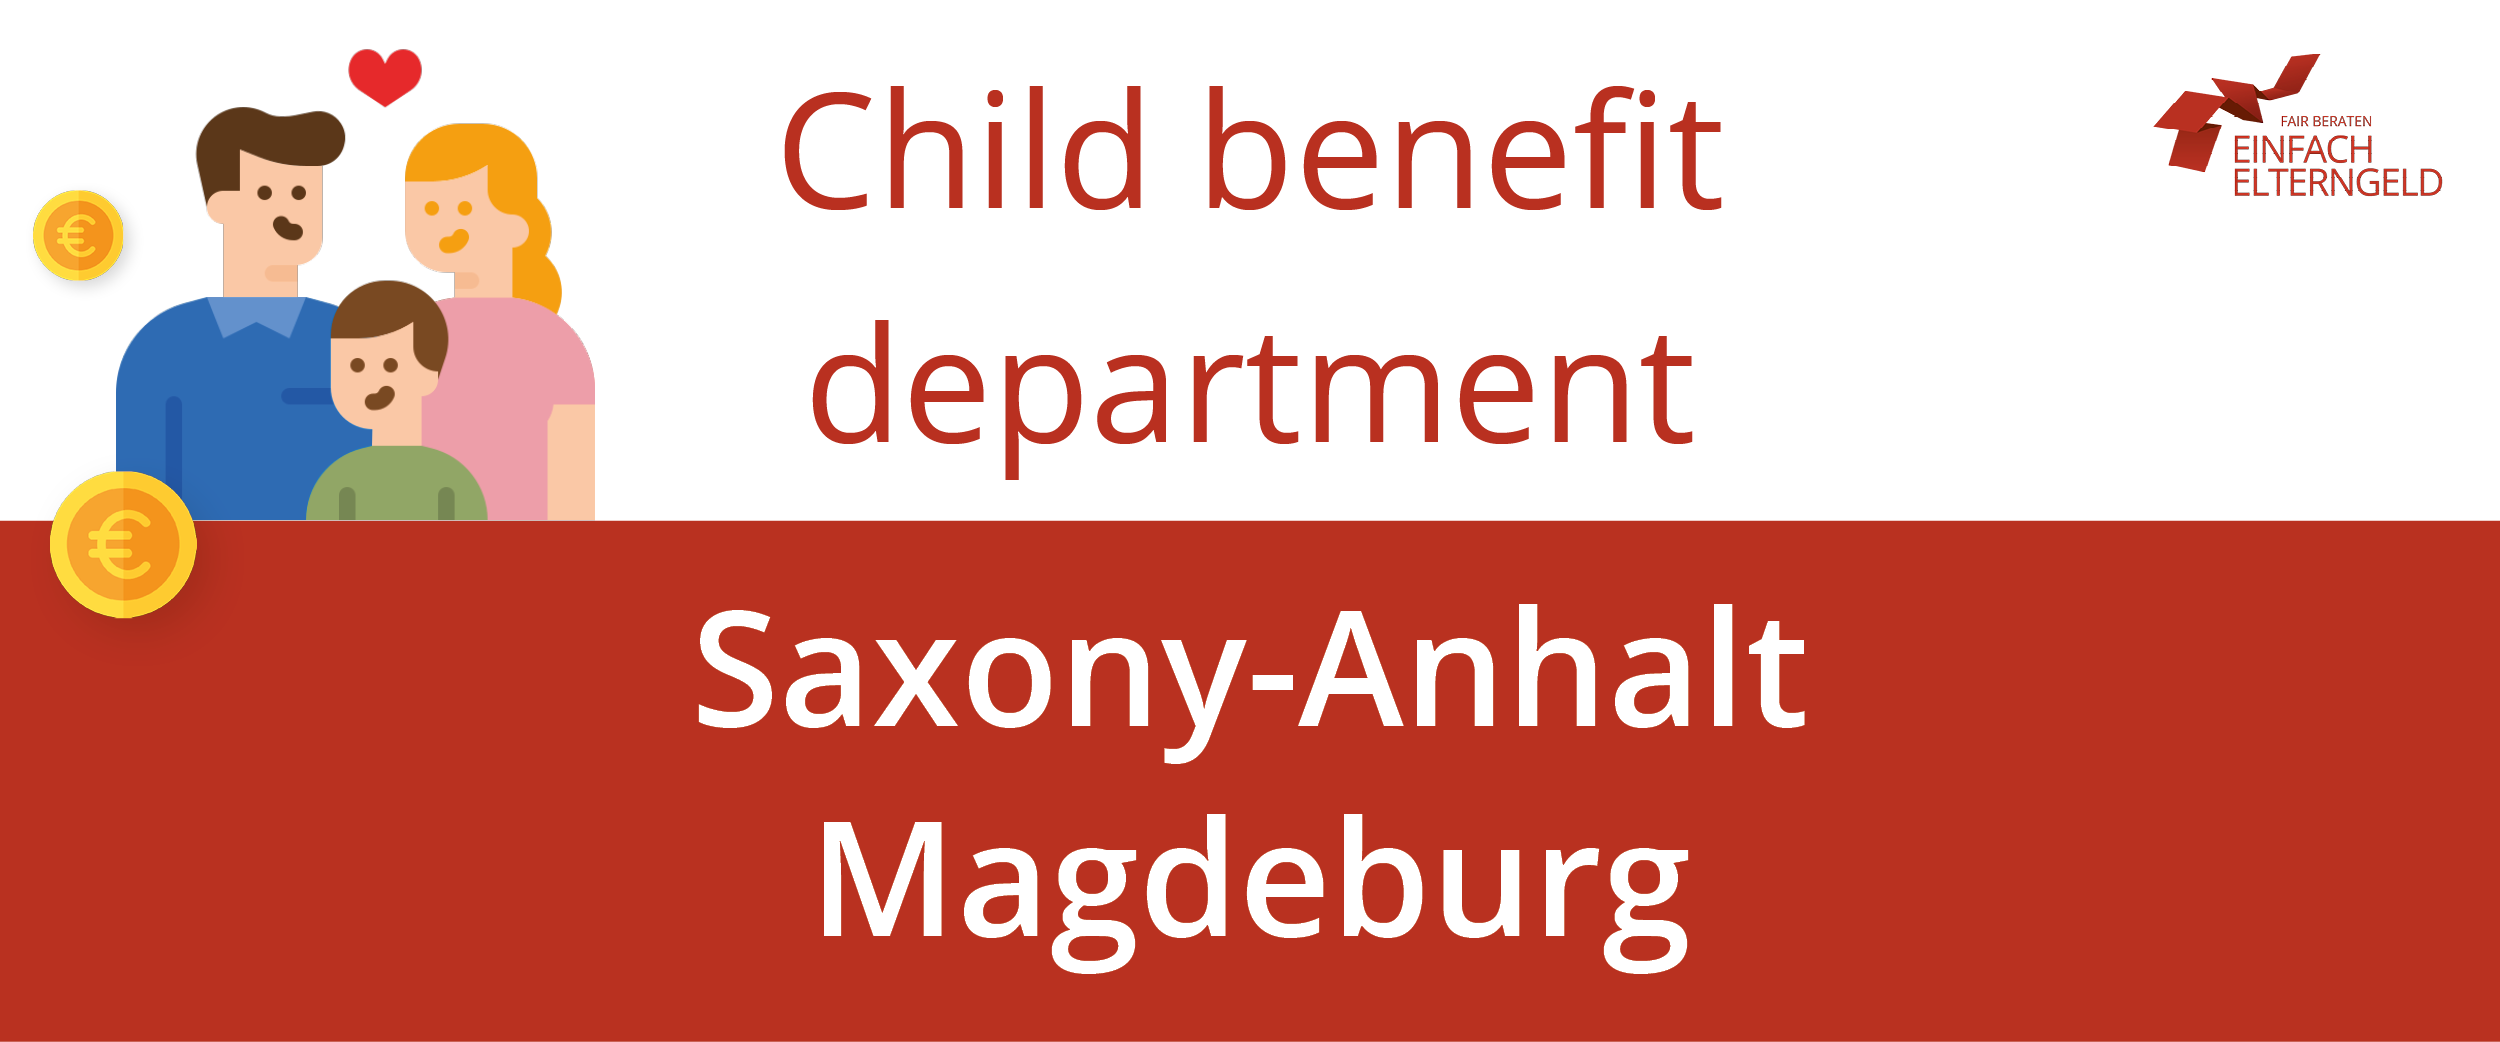 We present you the Child benefit department Saxony-Anhalt Magdeburg.